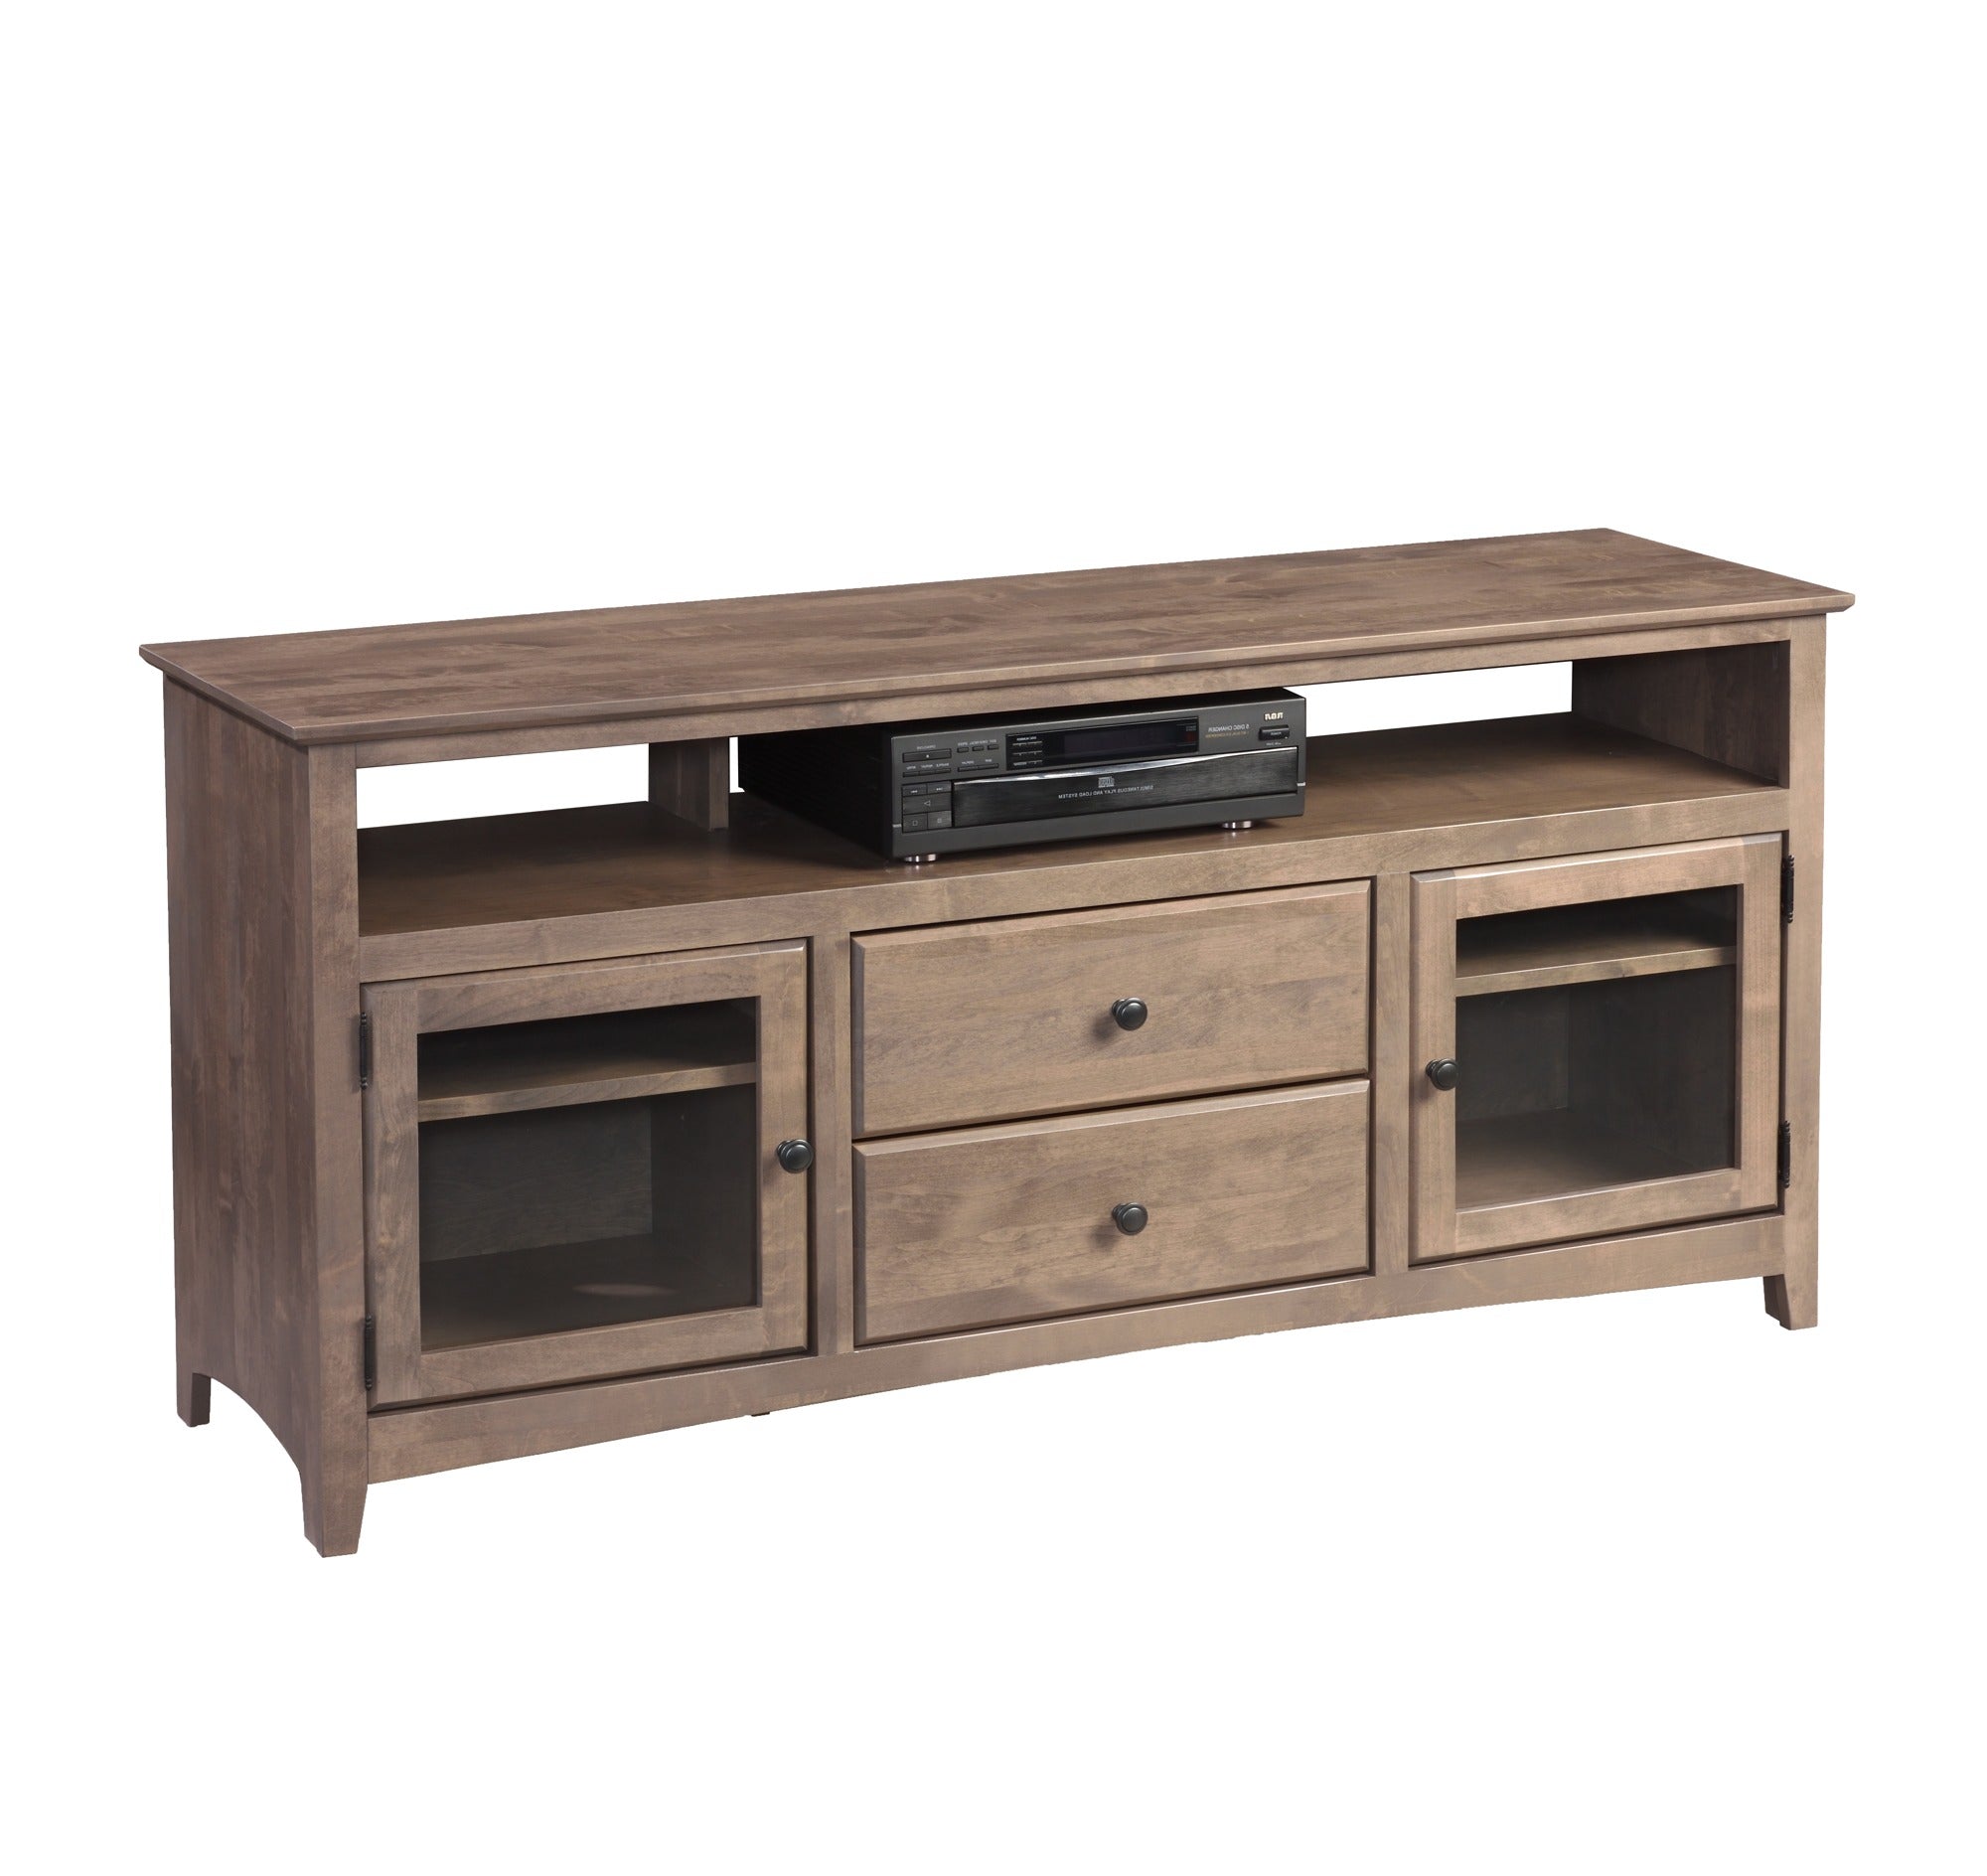 61" Entertainment Console - Rug & Home